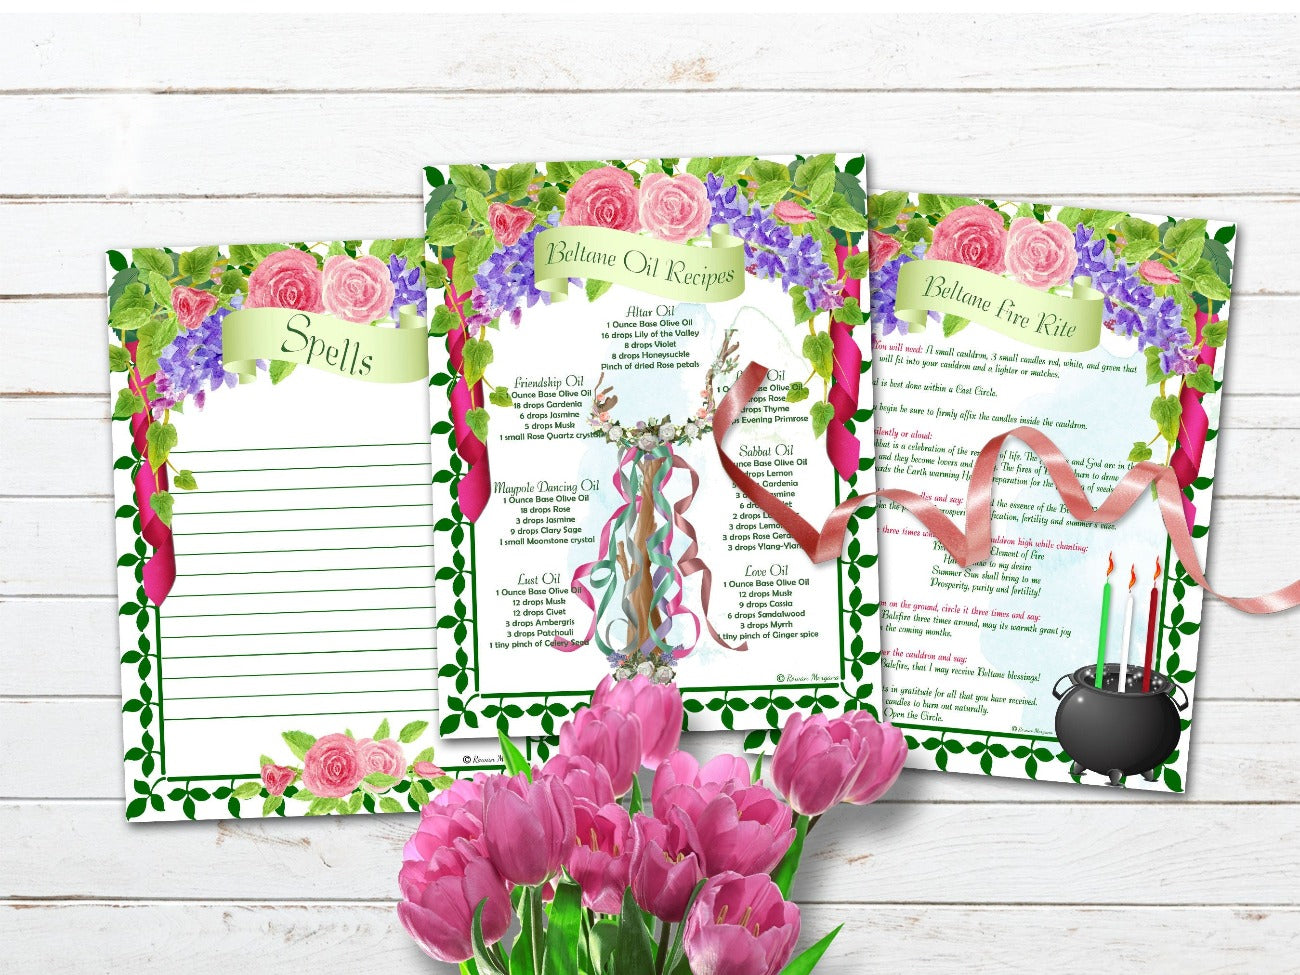 BELTANE WICCA SABBAT, Grimoire Printable Spellbook, Beltane Oil Recipes, Fire Rite, and Blank Lined Spells page - Morgana Magick Spell